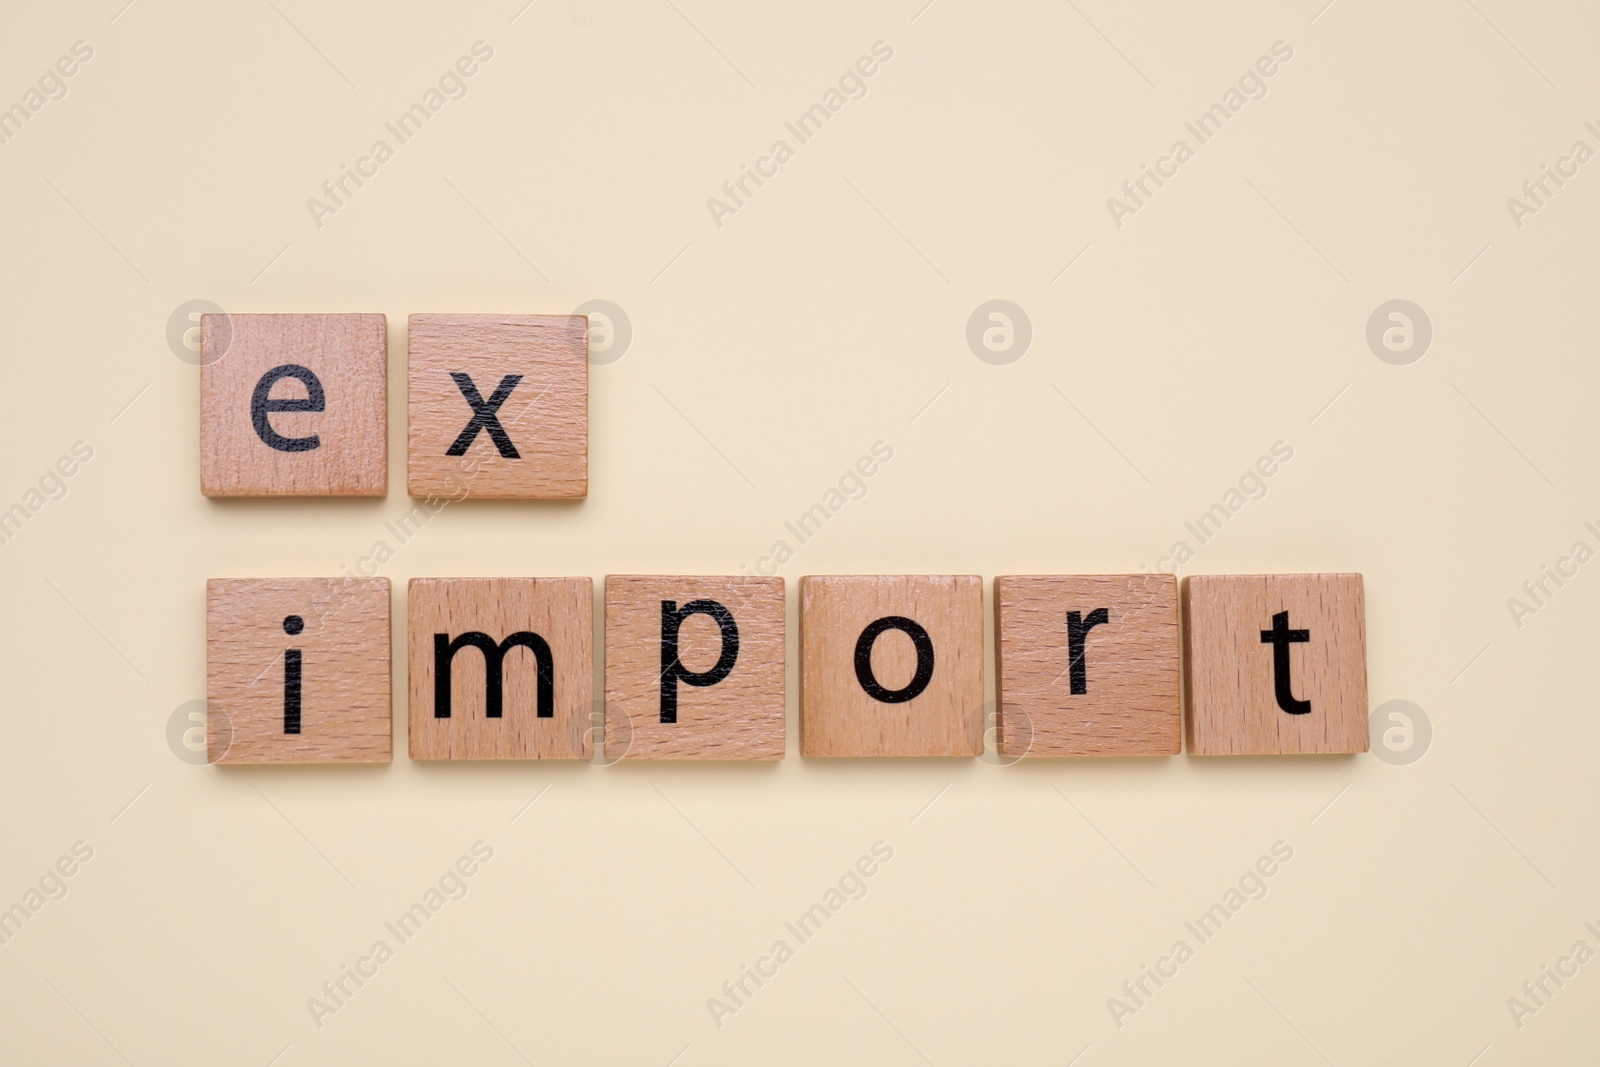 Photo of Words Export and Import made of wooden squares on beige background, top view